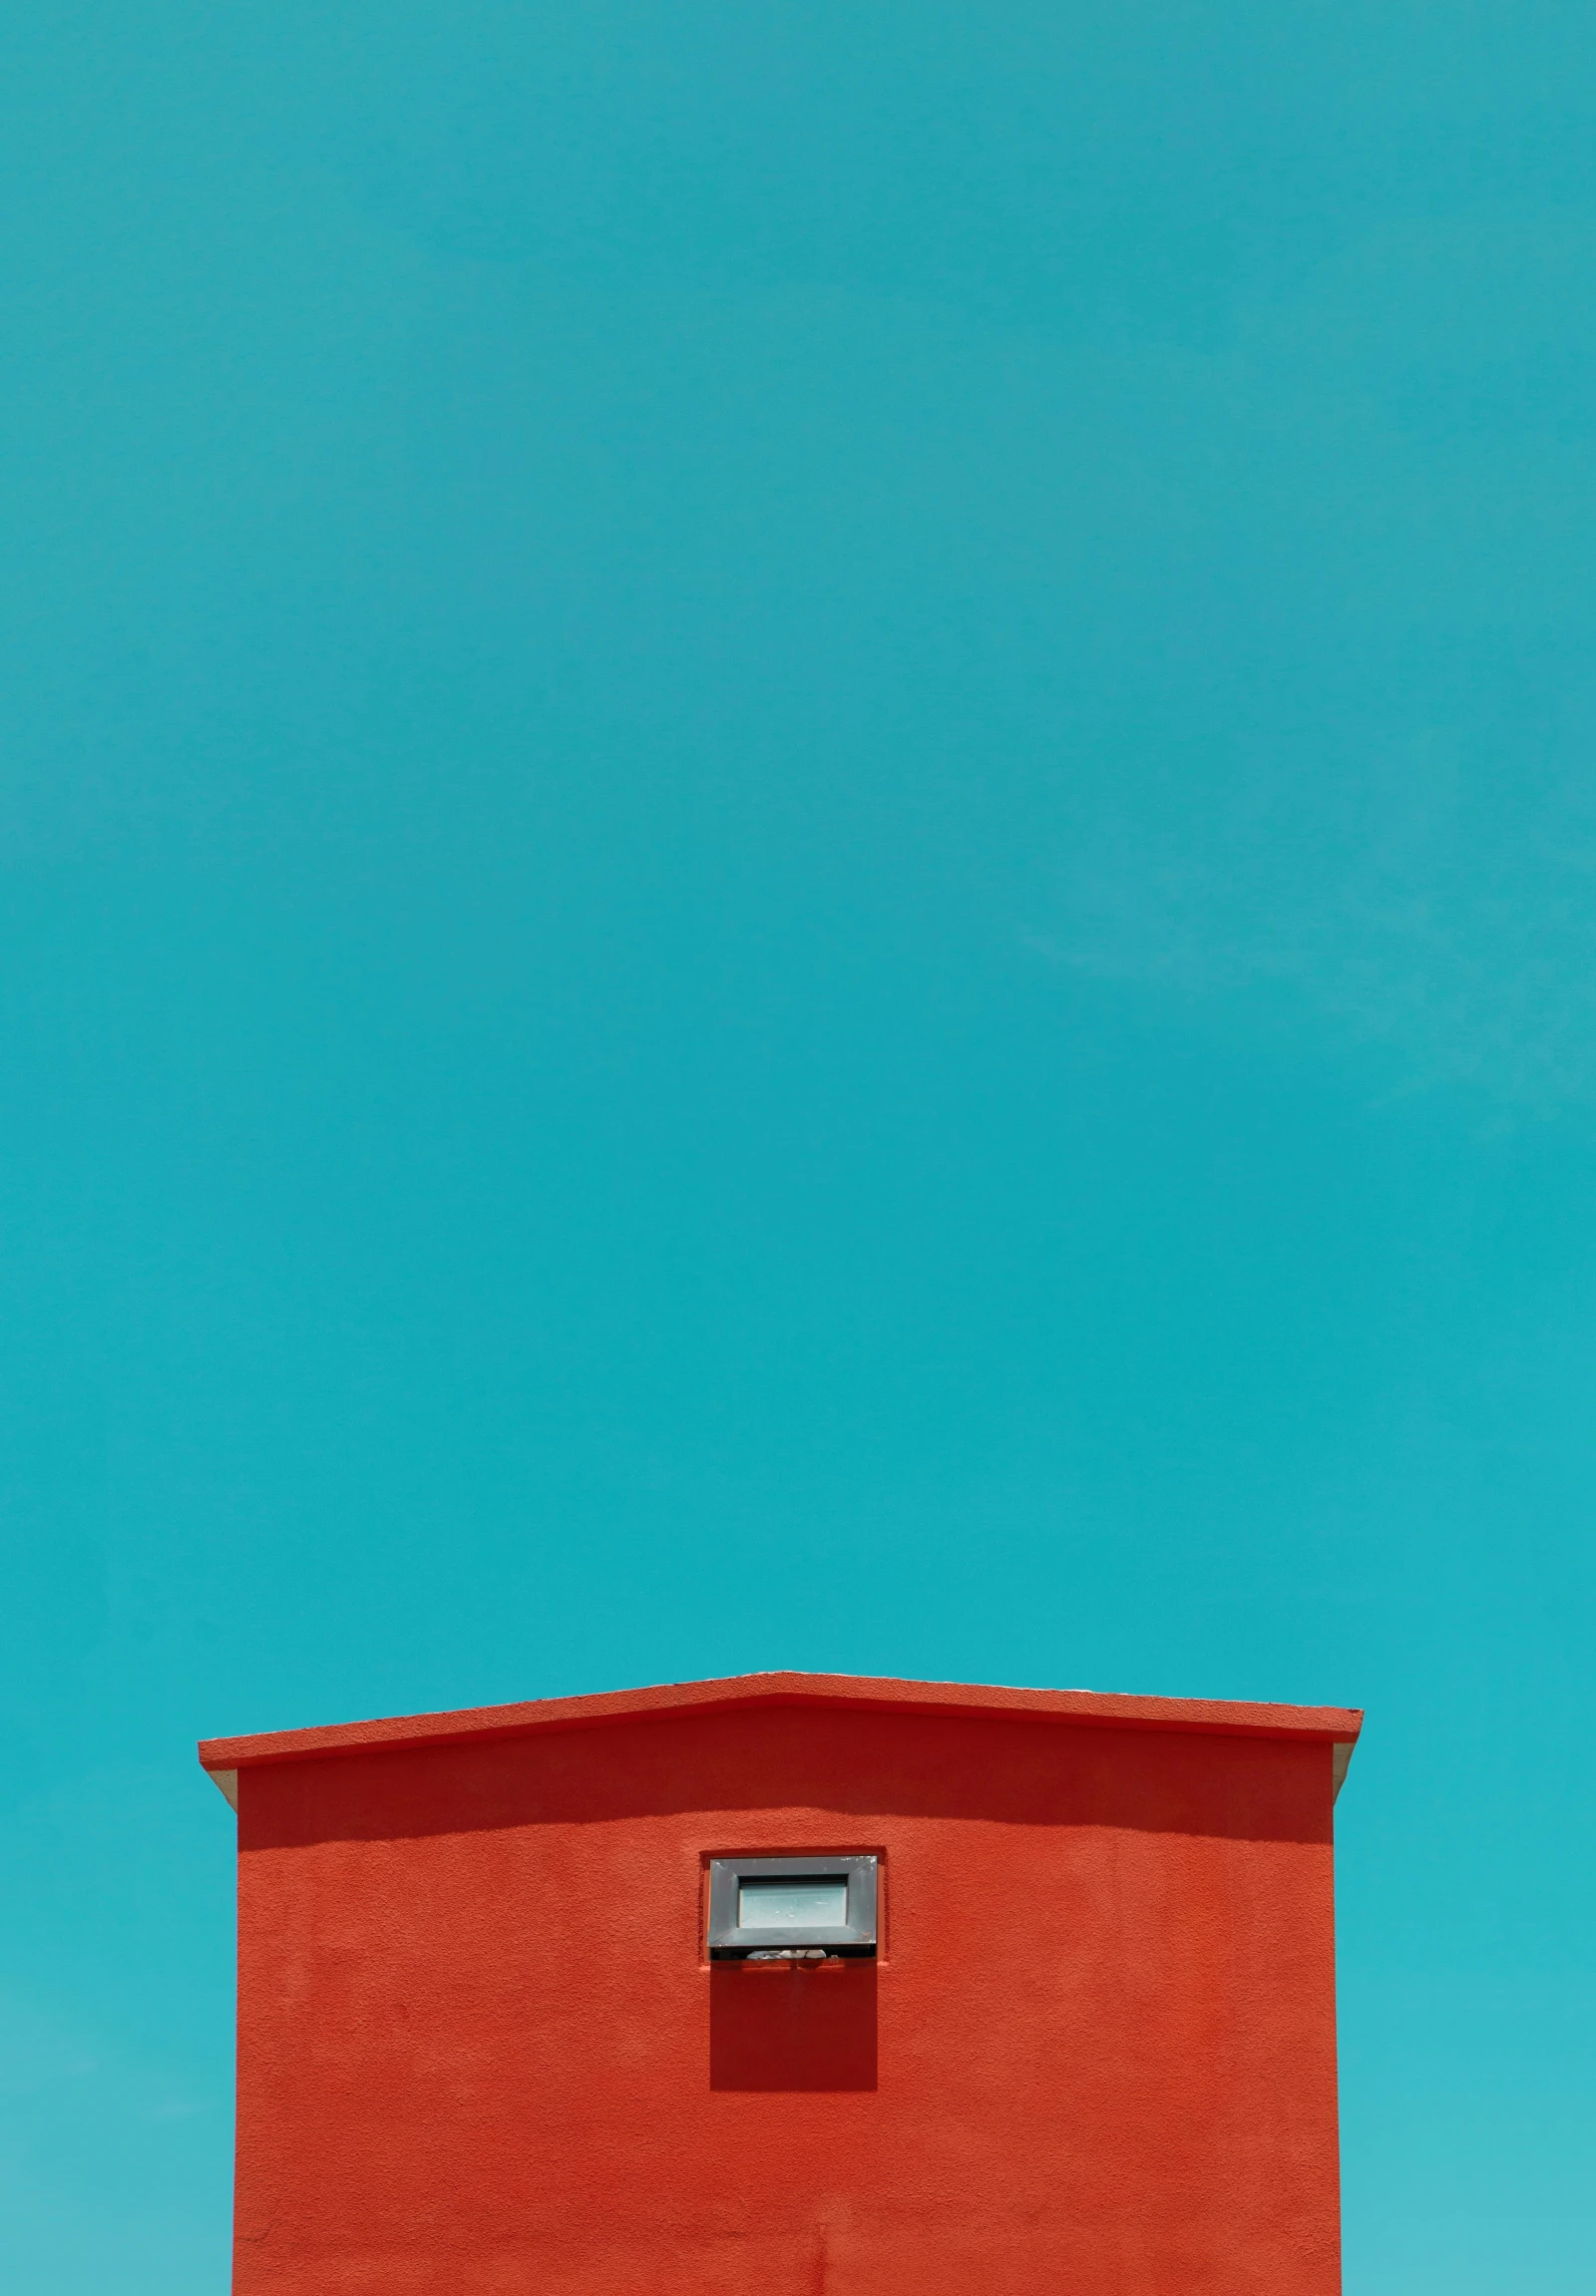 the top of a red building on a sunny day